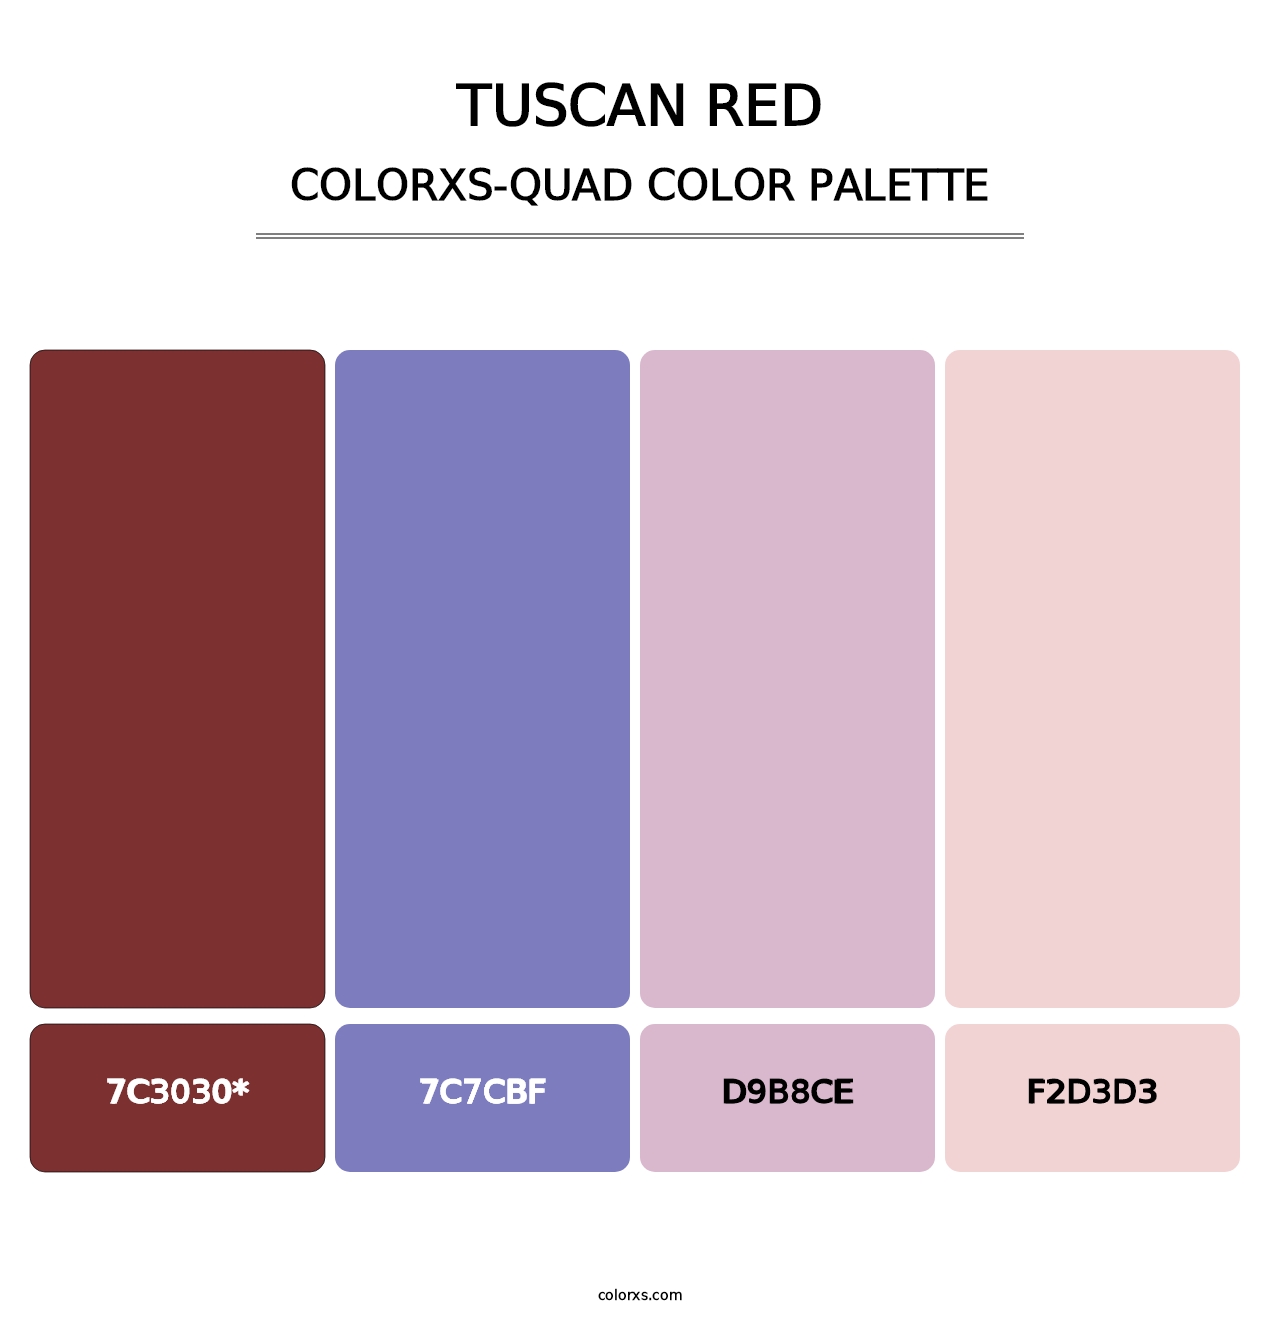 Tuscan Red - Colorxs Quad Palette